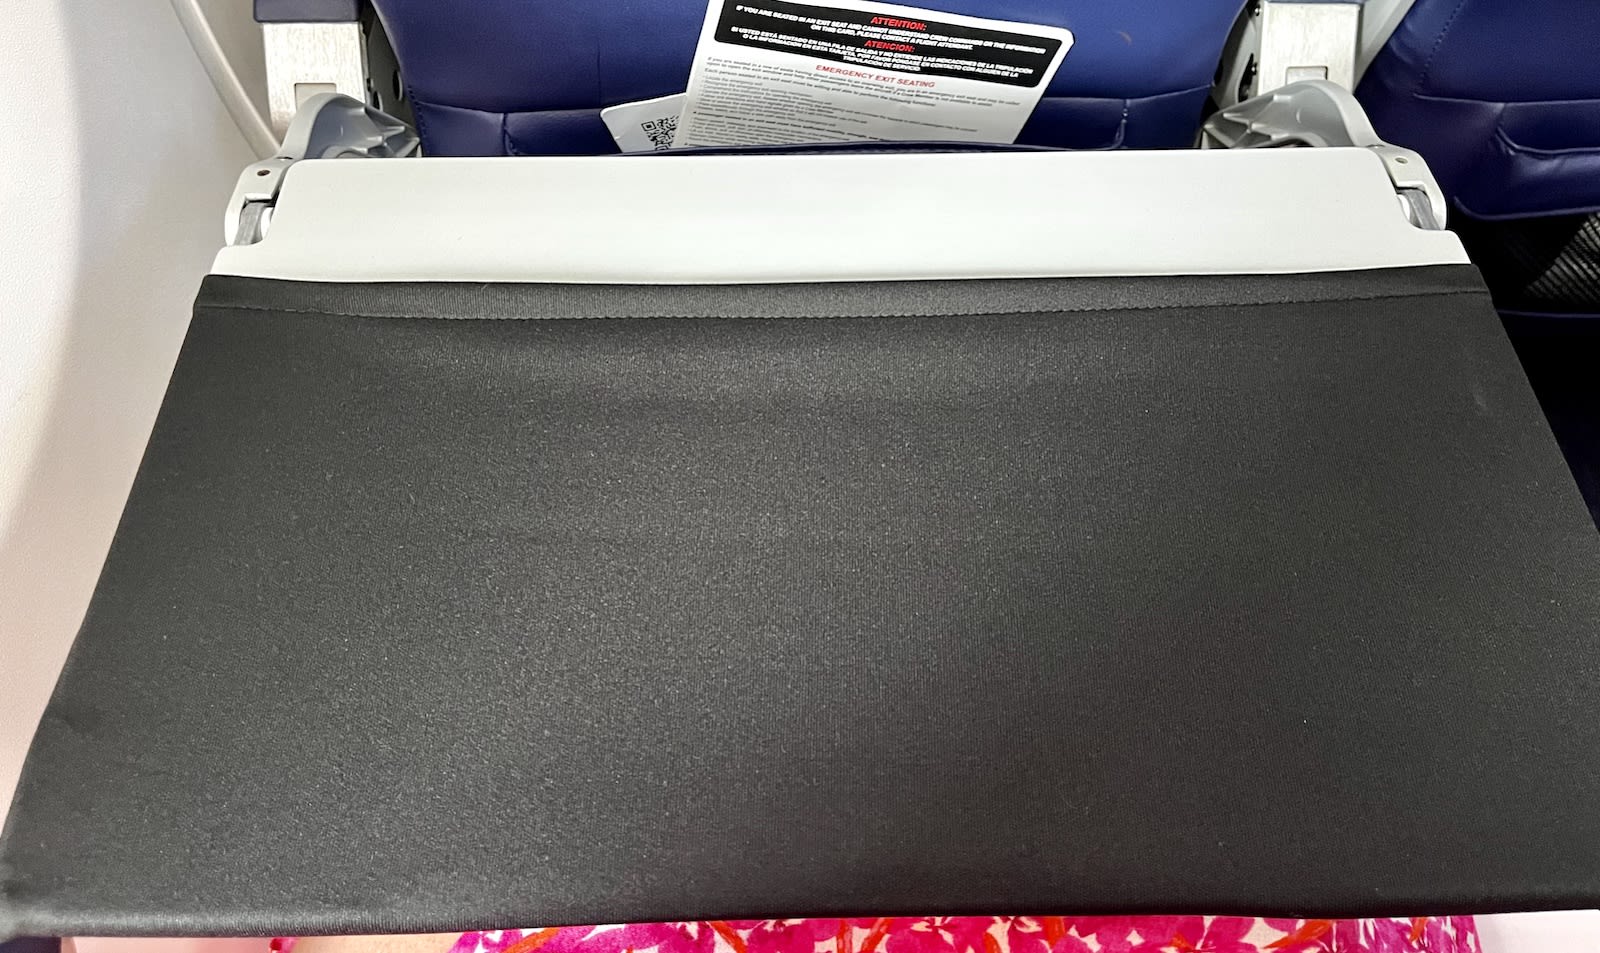 Airplane tray table cover! My new favorite travel tool. Pockets on